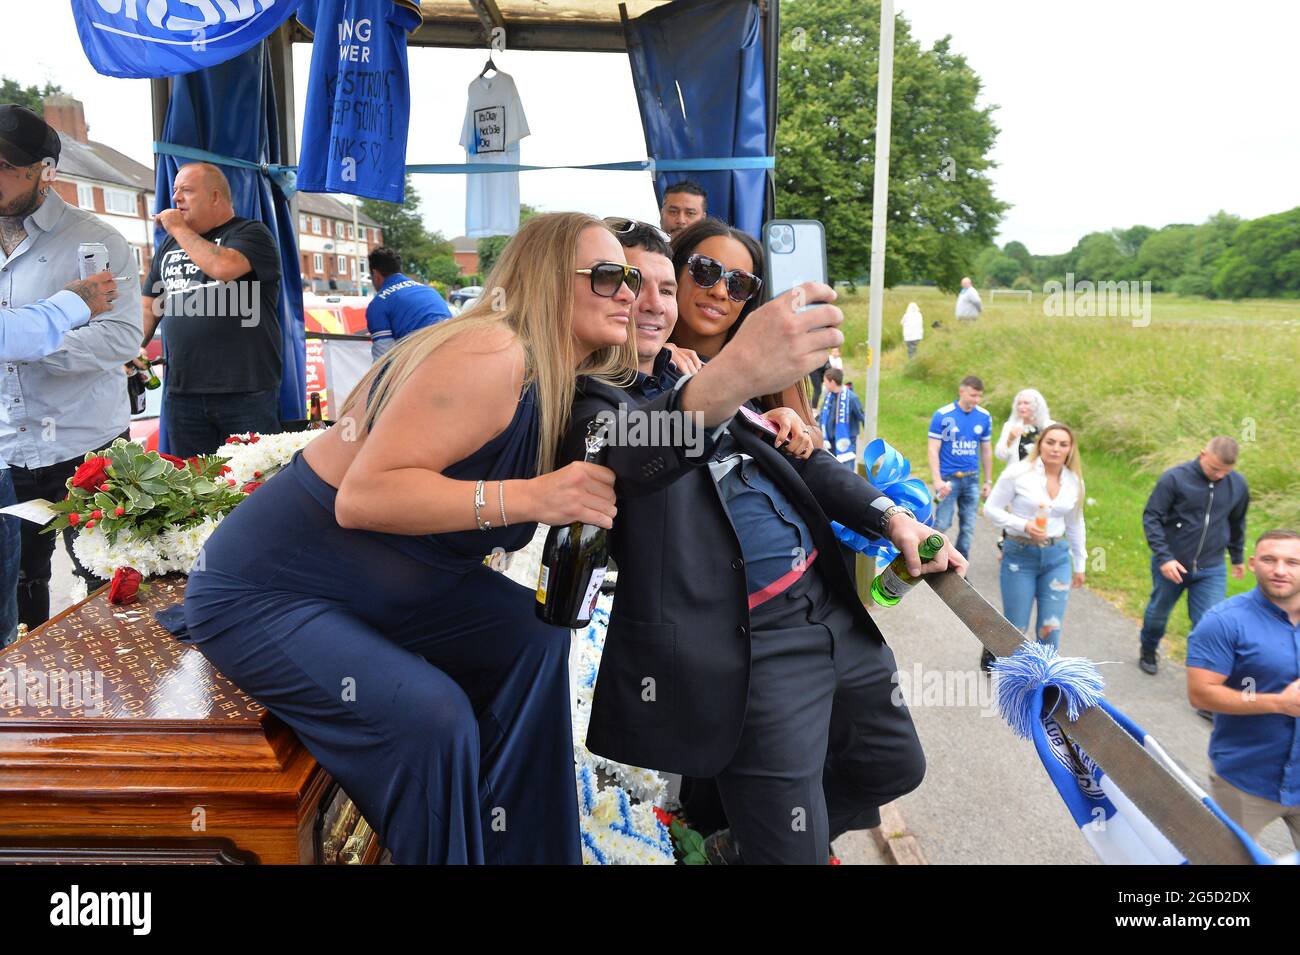 Leicester, UK. 26th June 2021. UK News. A funeral carnival parade for Mark Winkless, who turned his back on football hooliganism to persue a career as an actor, takes place around Braunstone Park in Leicester. The parade was attended by former Shameless actor Jody Latham. Alex Hannam/Alamy Live News Stock Photo